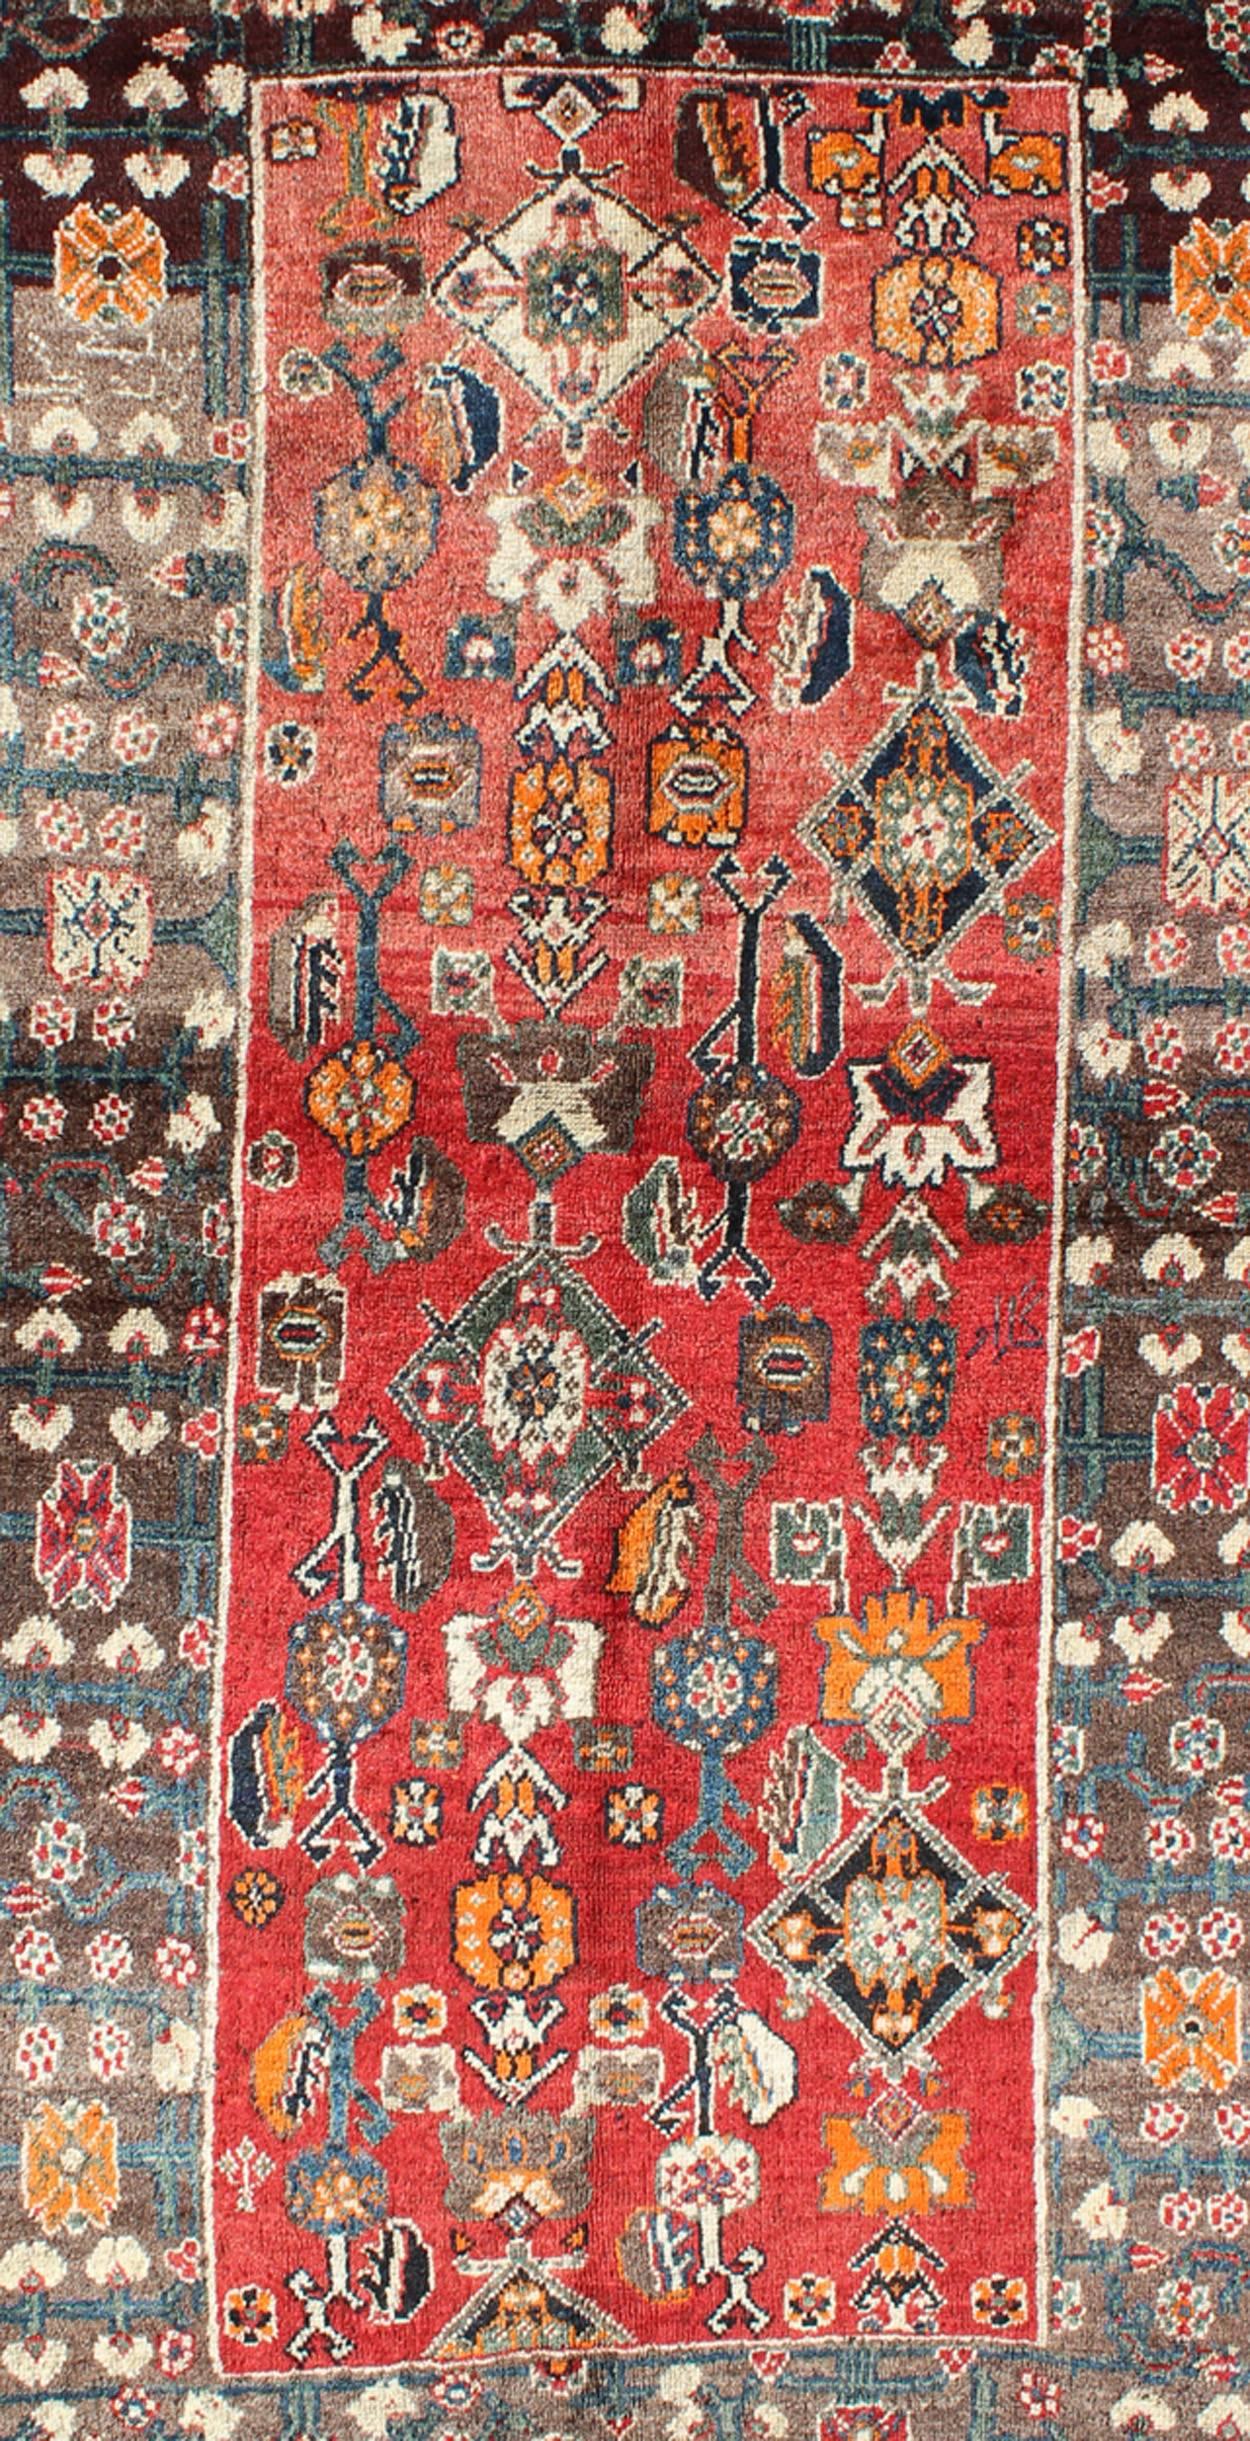 Tribal Red Background Shiraz Persian Rug with Sub-Geometric Motifs Throughout